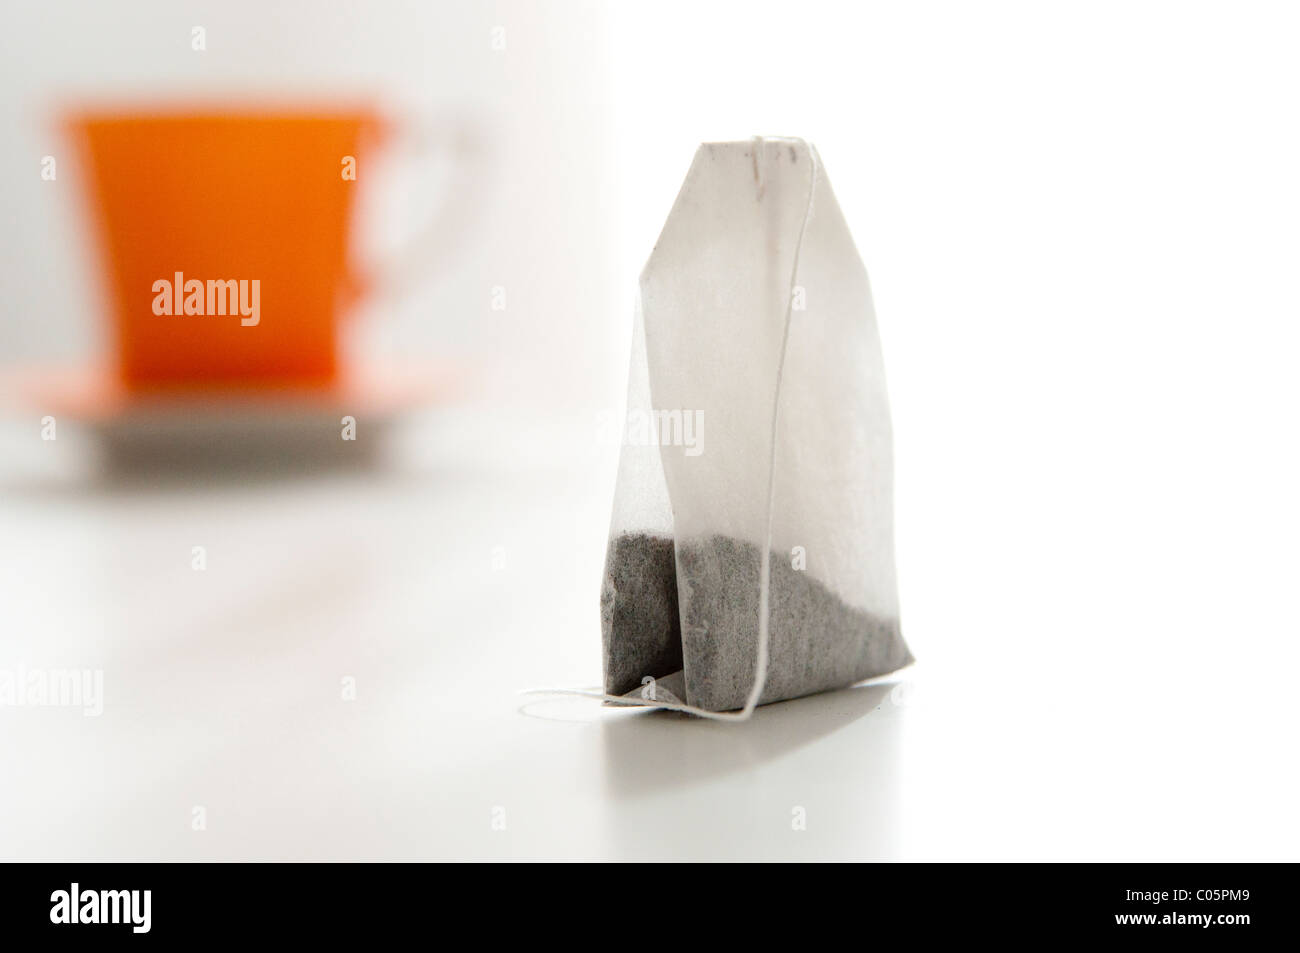 close up of tea bag with out of focus orange tea cup in background Stock Photo